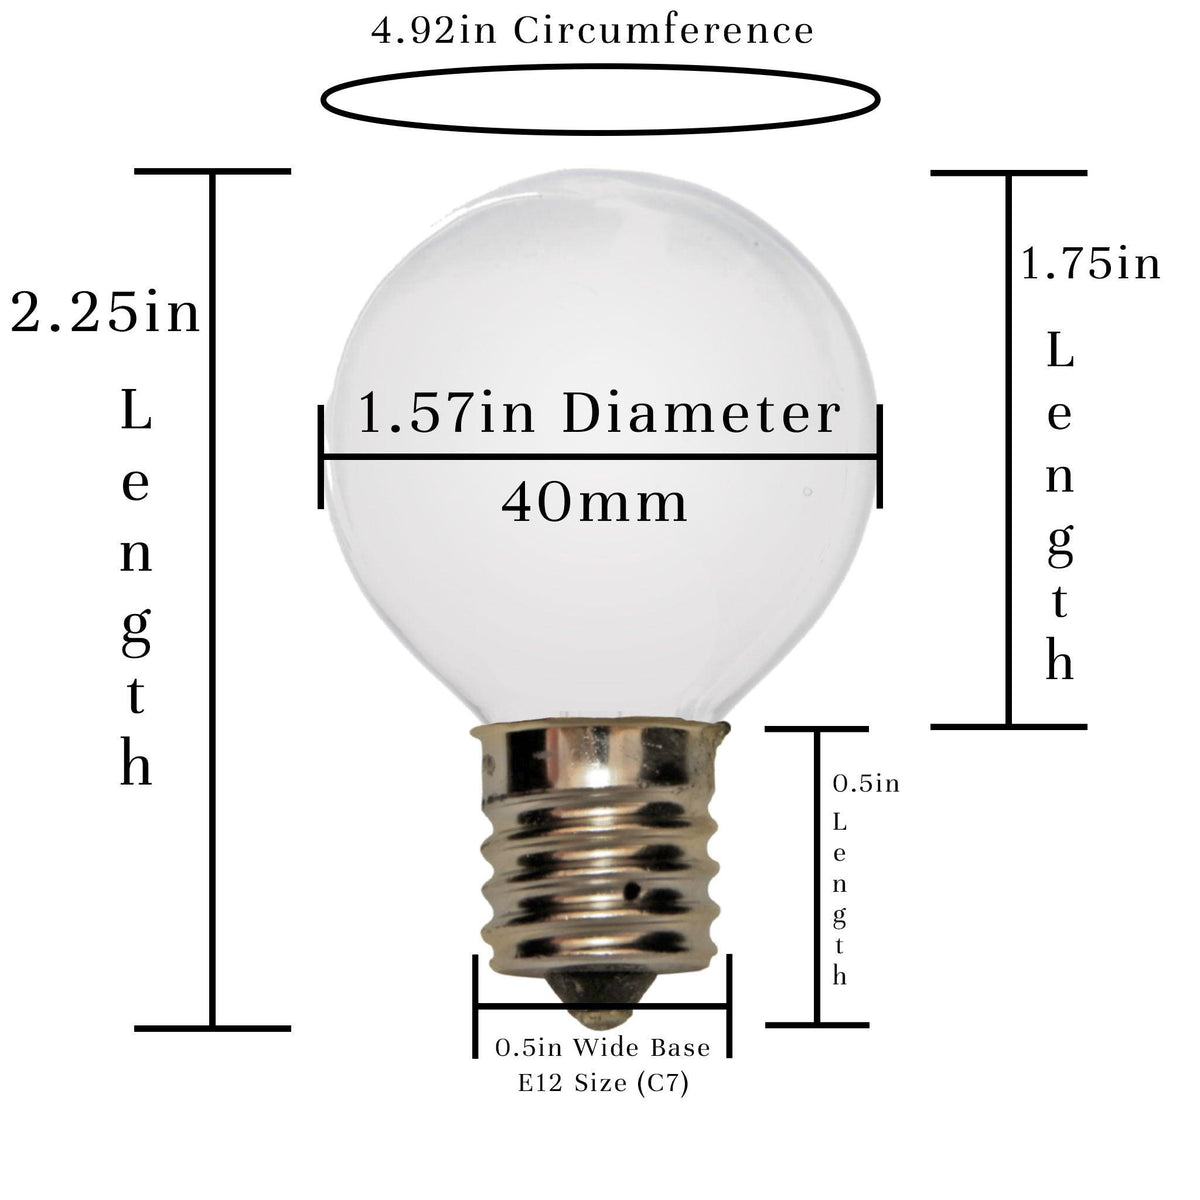 Size and dimensions of brand new opaque White G40 Globe Light Bulbs Replace your old bulbs today at leedisplay.com